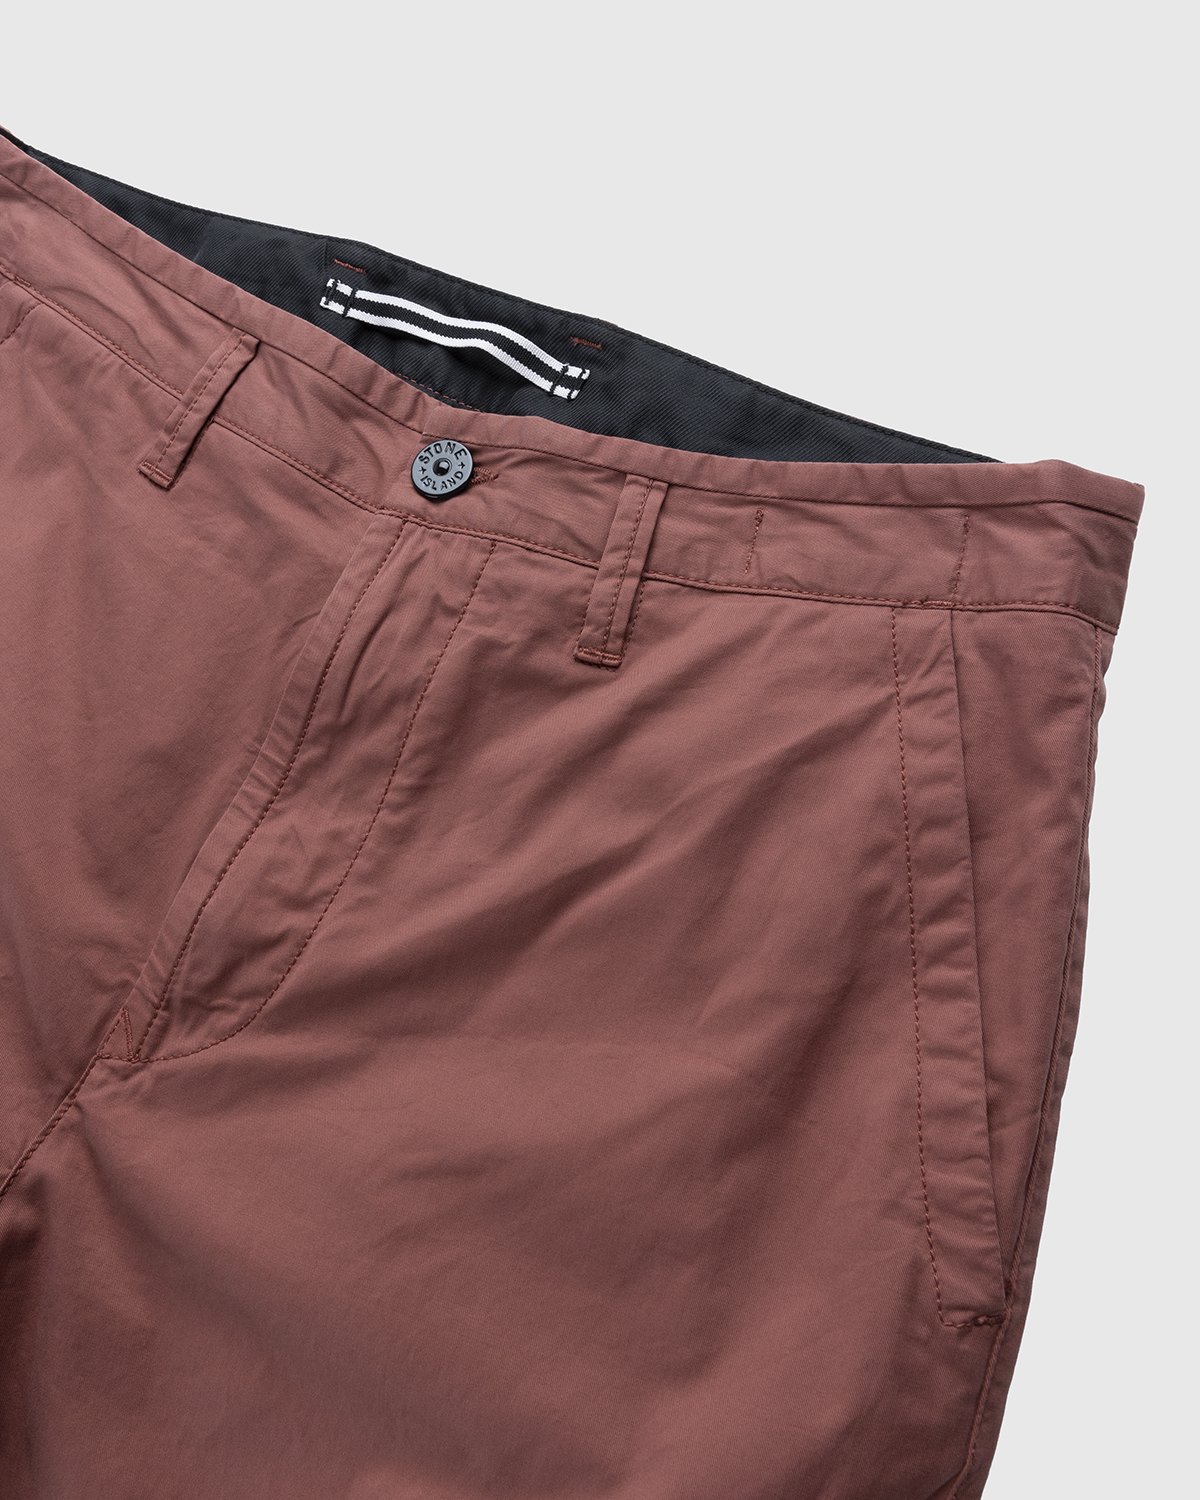 Stone Island - Pants Brick Red - Clothing - Red - Image 3